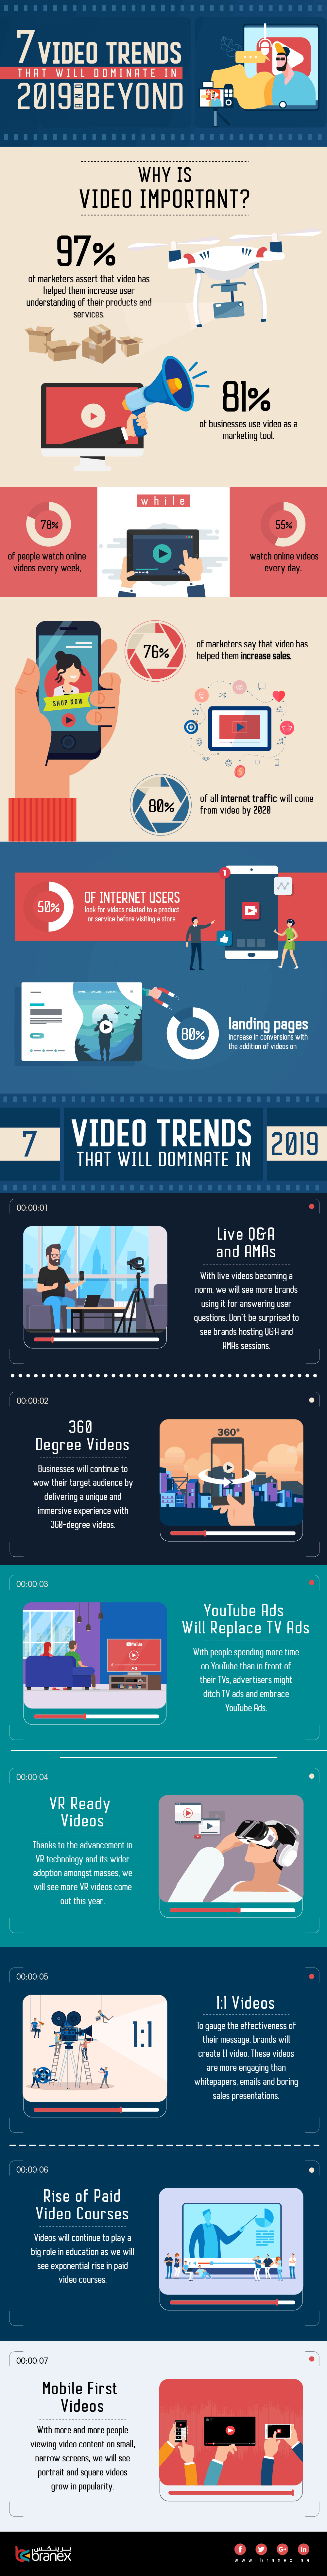 video trends for 2019